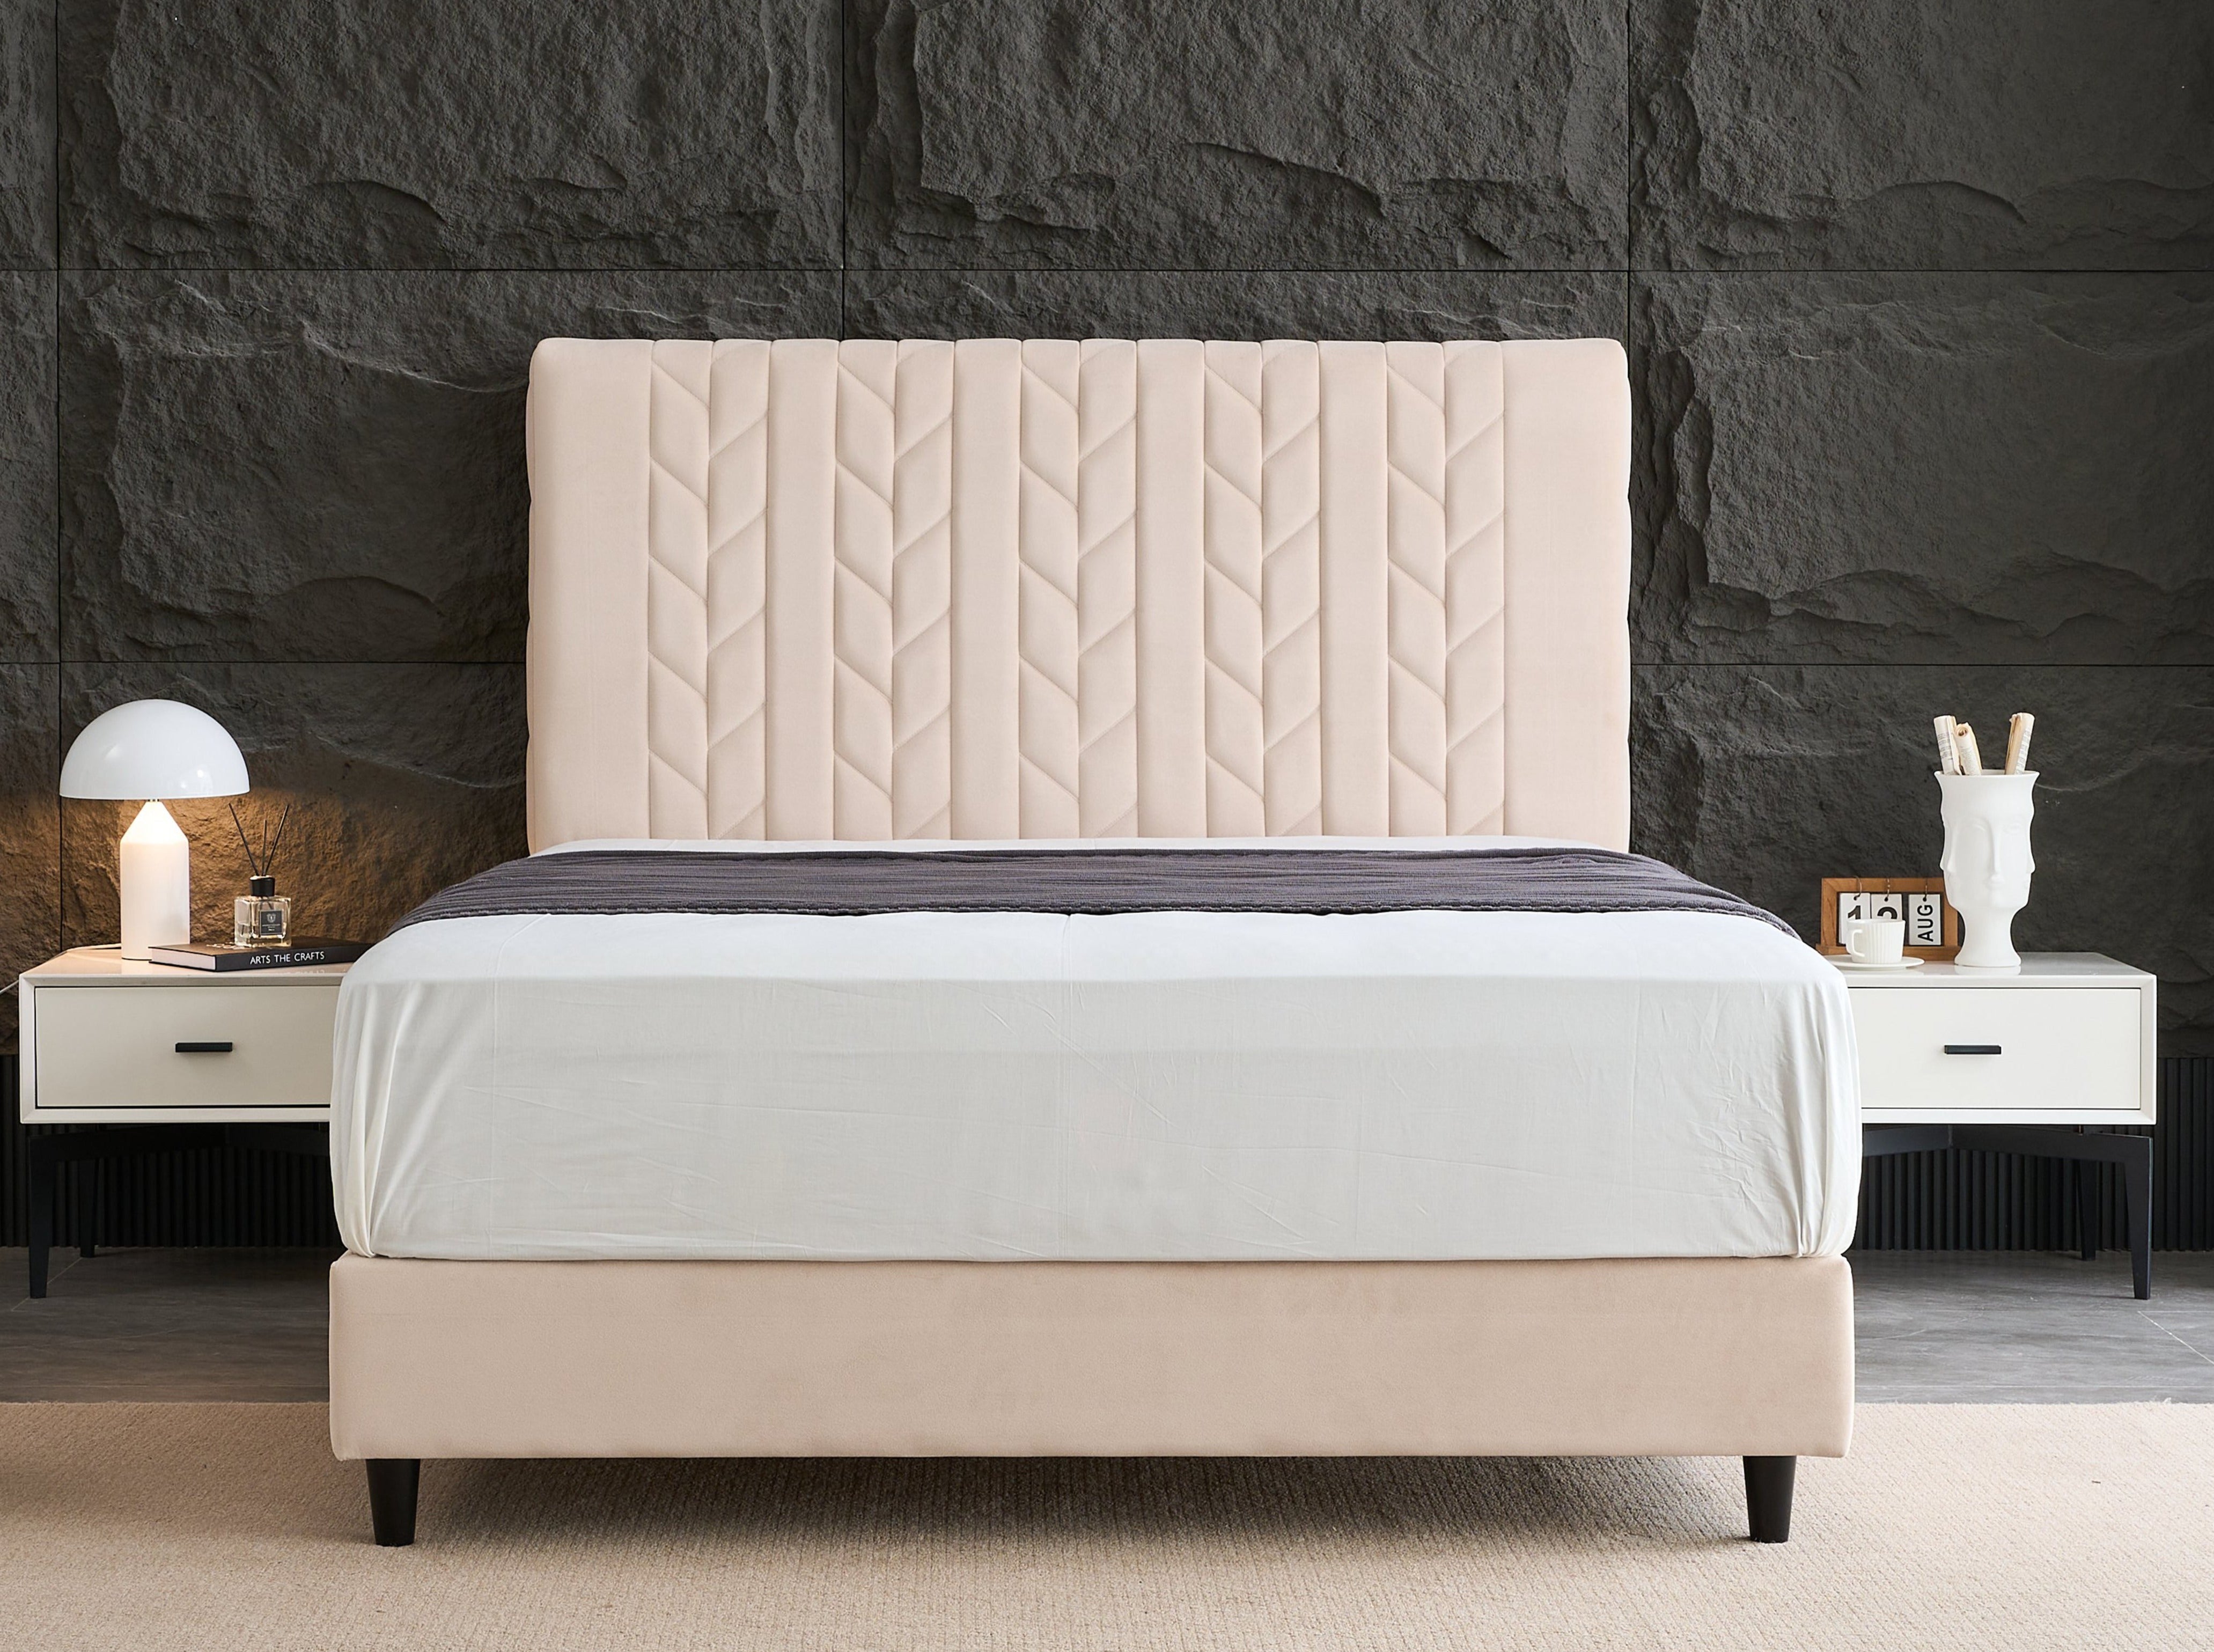 Panax Bed Frame with headboard